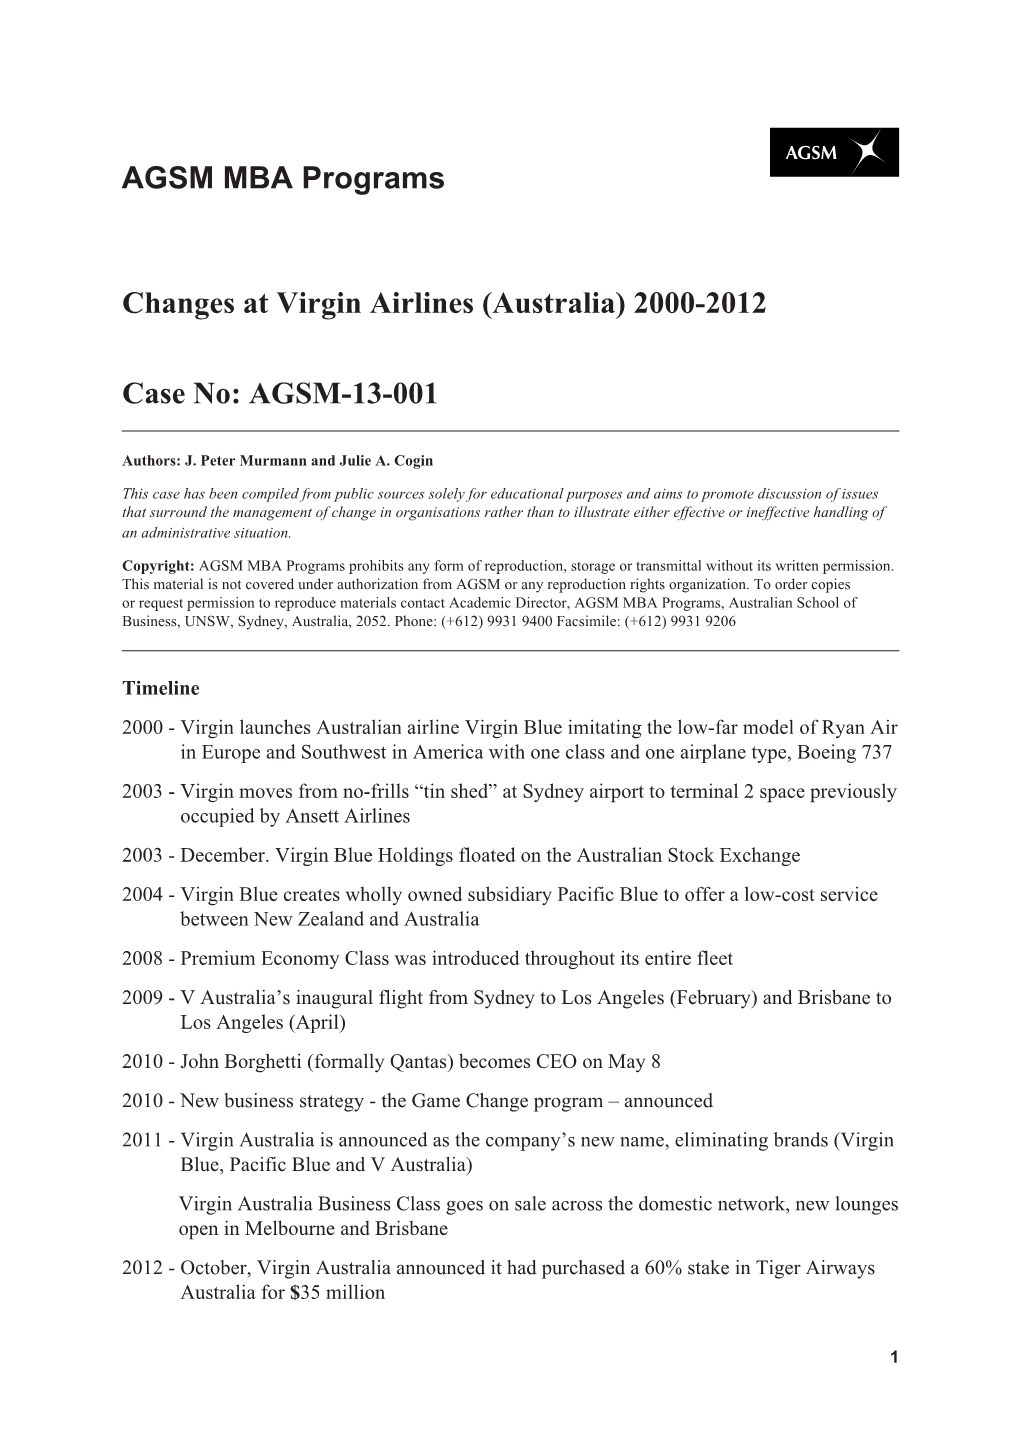 Changes at Virgin Airlines (Australia) 2000-2012 Case No: AGSM-13-001 AGSM MBA Programs